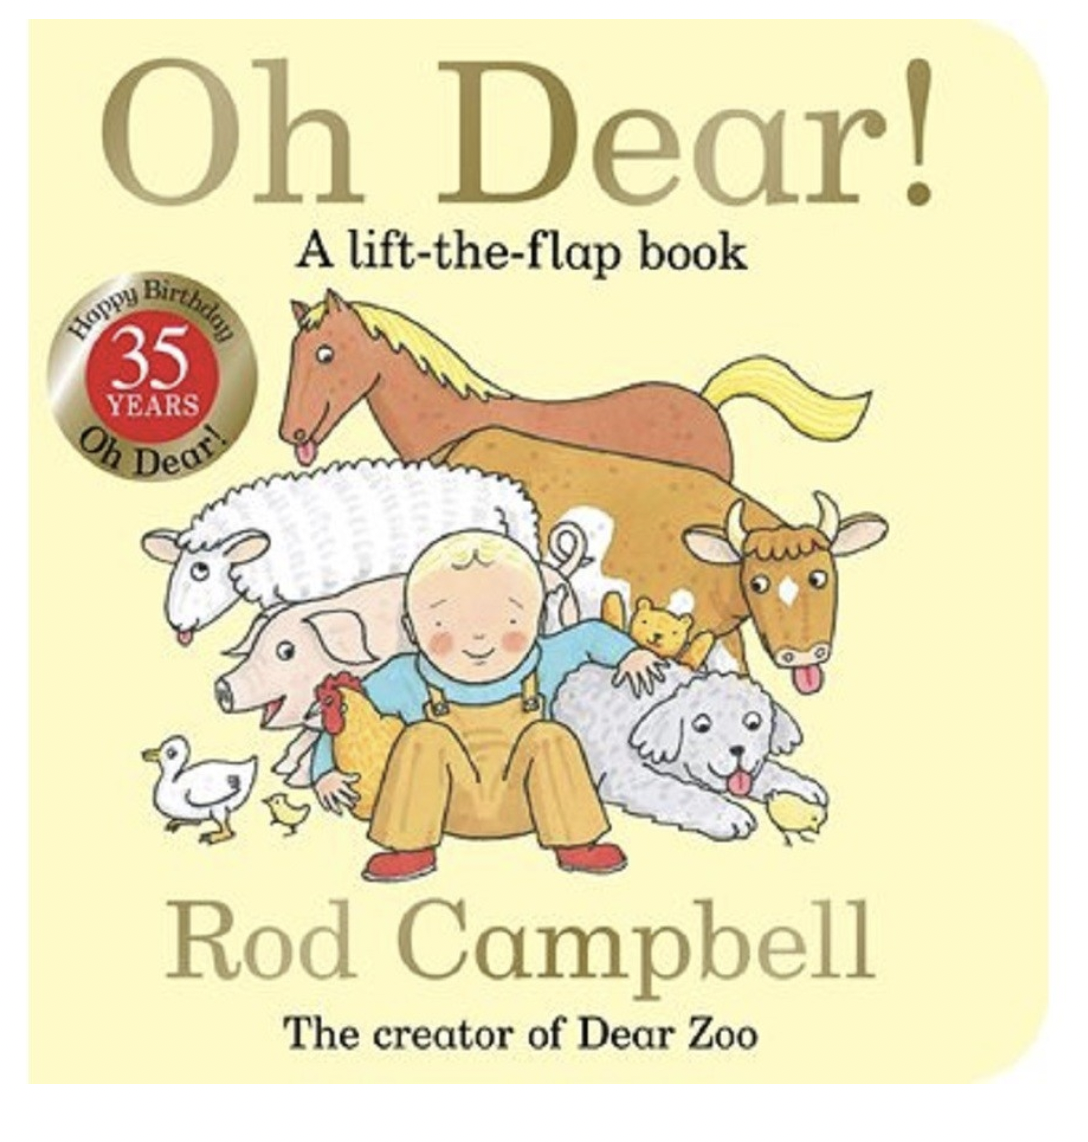 Oh Dear! by Rod Campbell